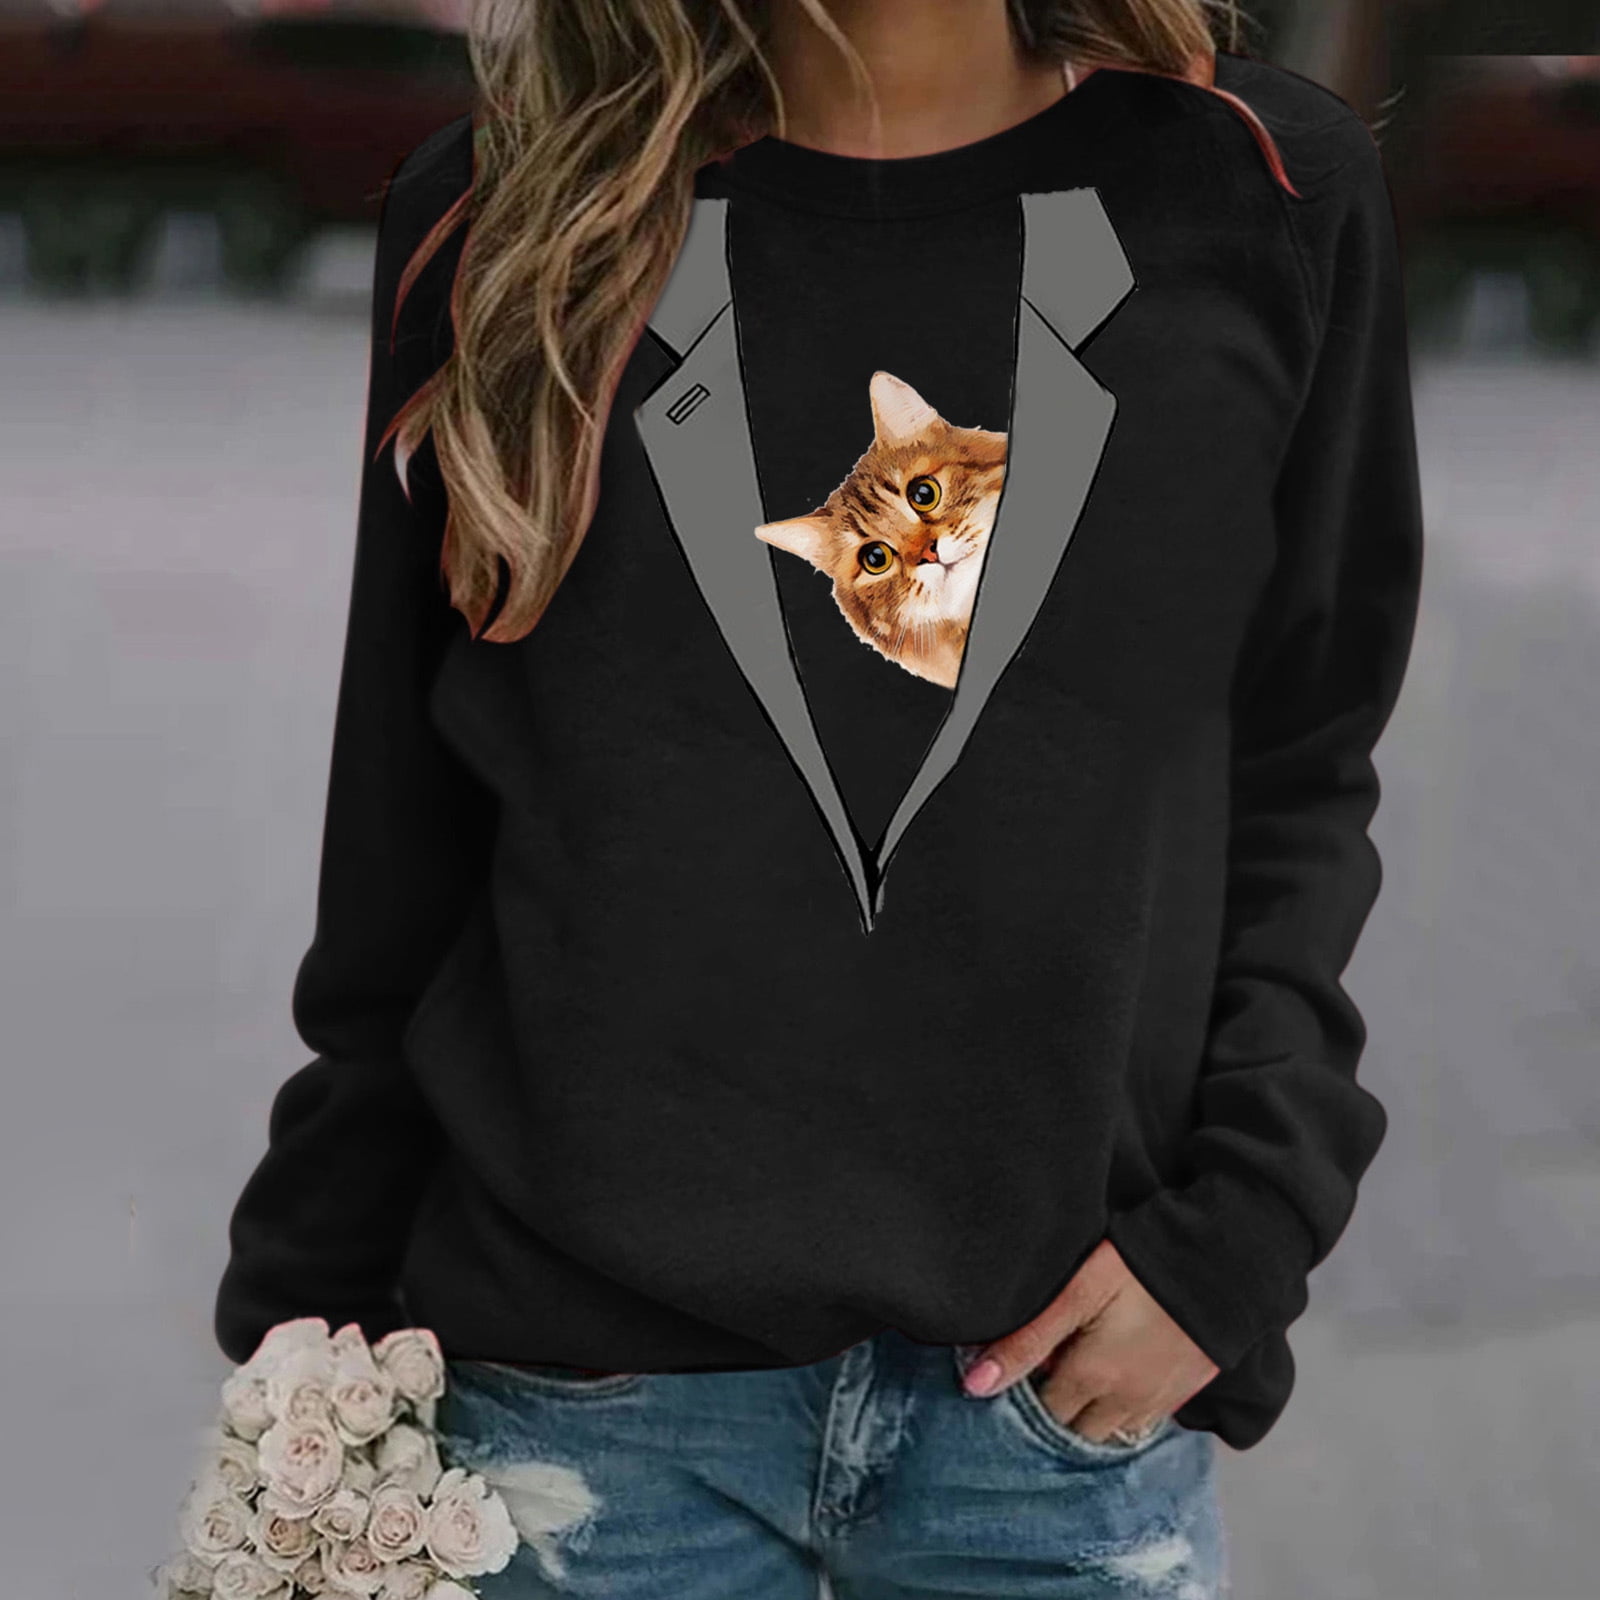 Swyss Womens Cat Printed Hoodies Sweatshirt,Long Sleeve Colorblock Pullover Fashion Autumn Tops Blouse